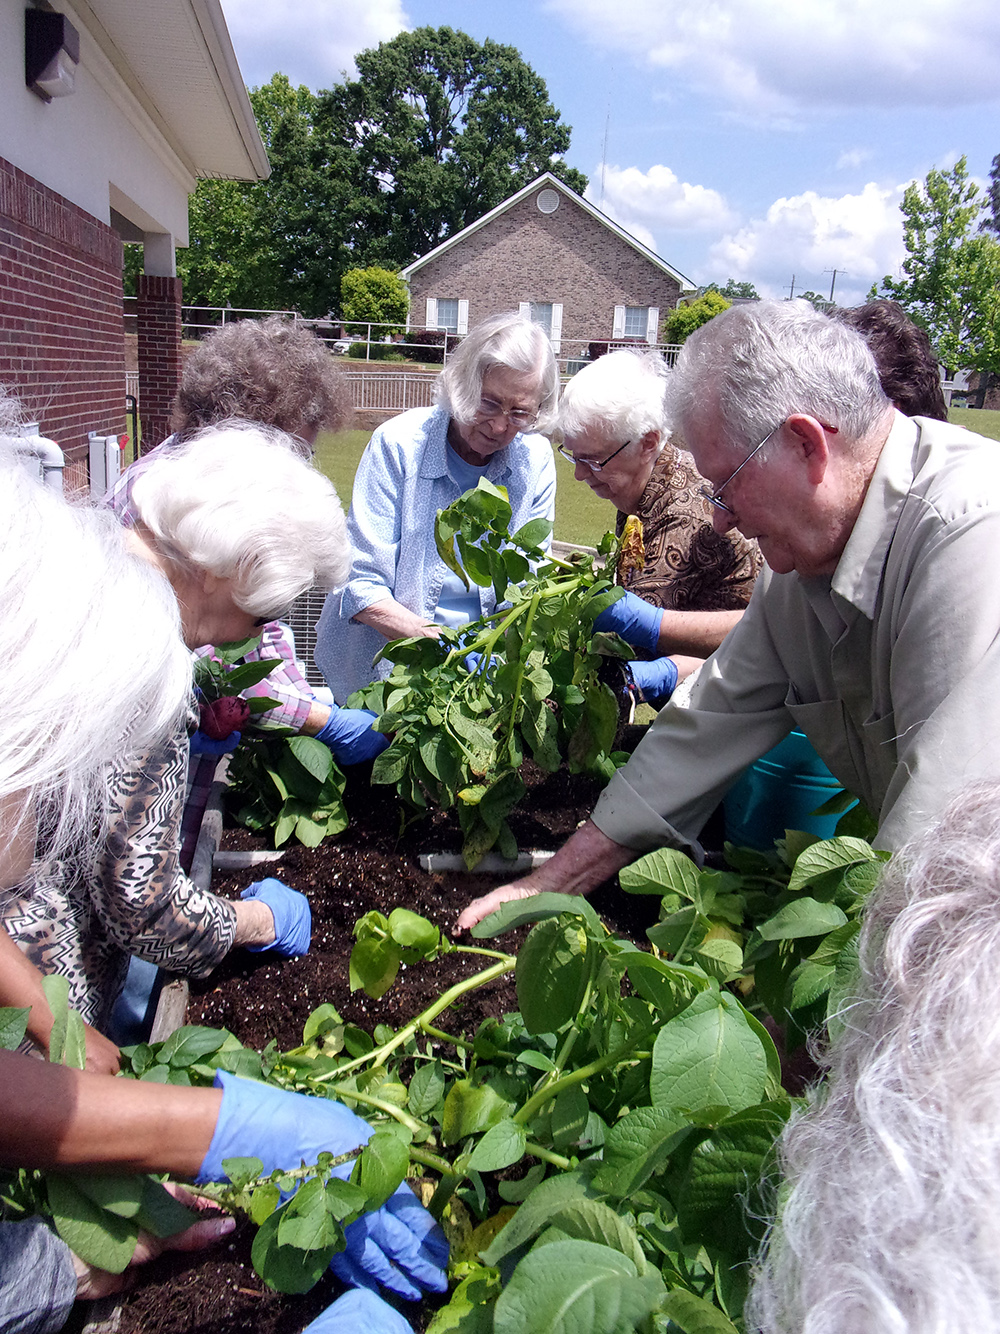 People surround a waist-high elevated gardening bed as they dig up potatoes grown in the bed.